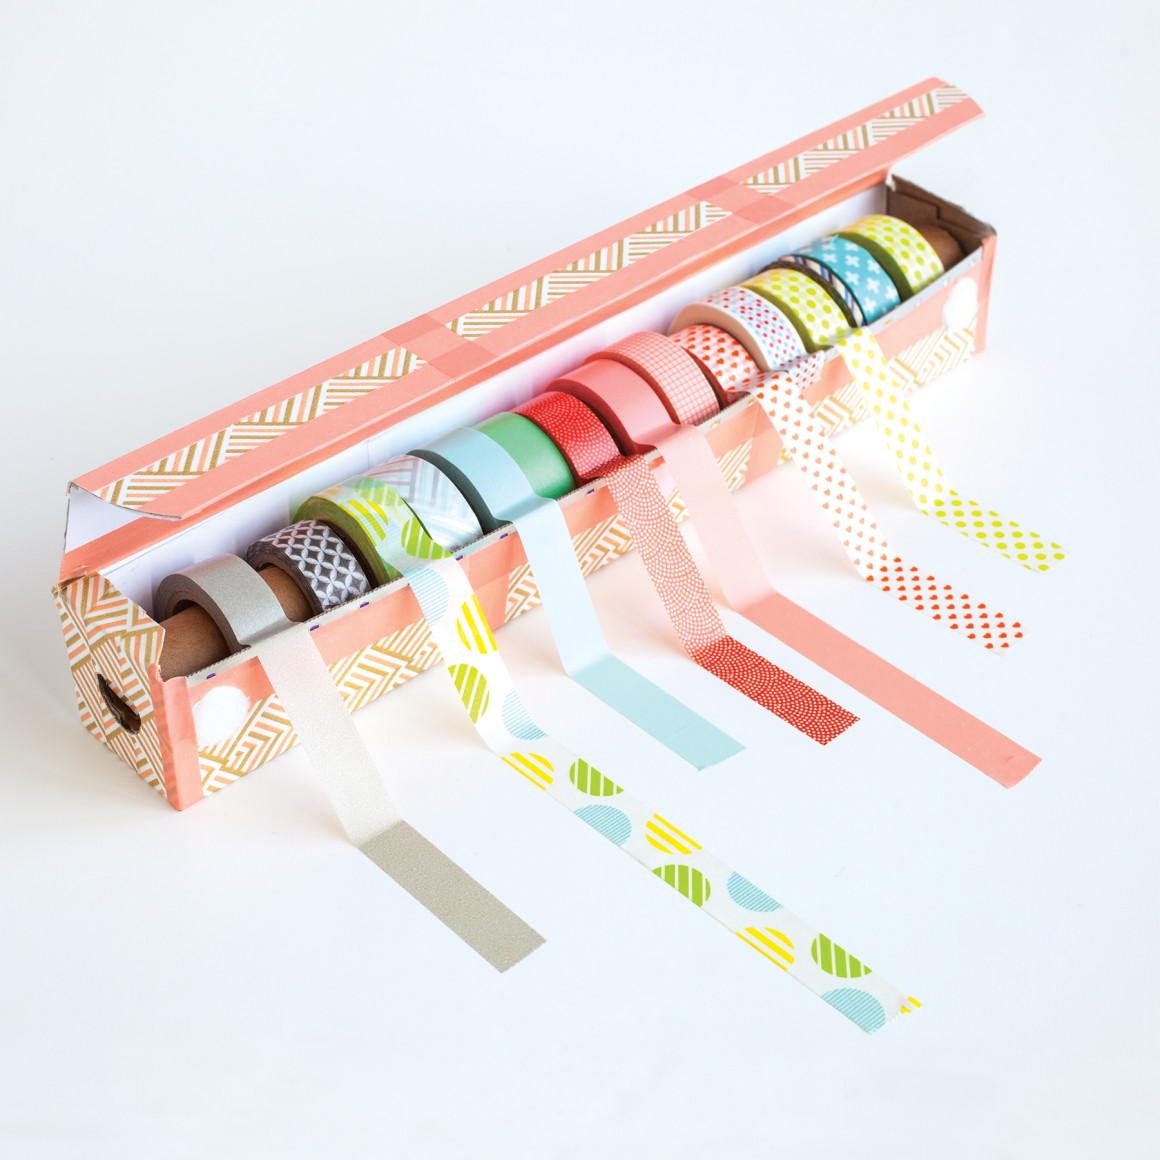 Easy Diy Washi Tape Dispenser Project From Crafts By Amy Anderson O Creative Family